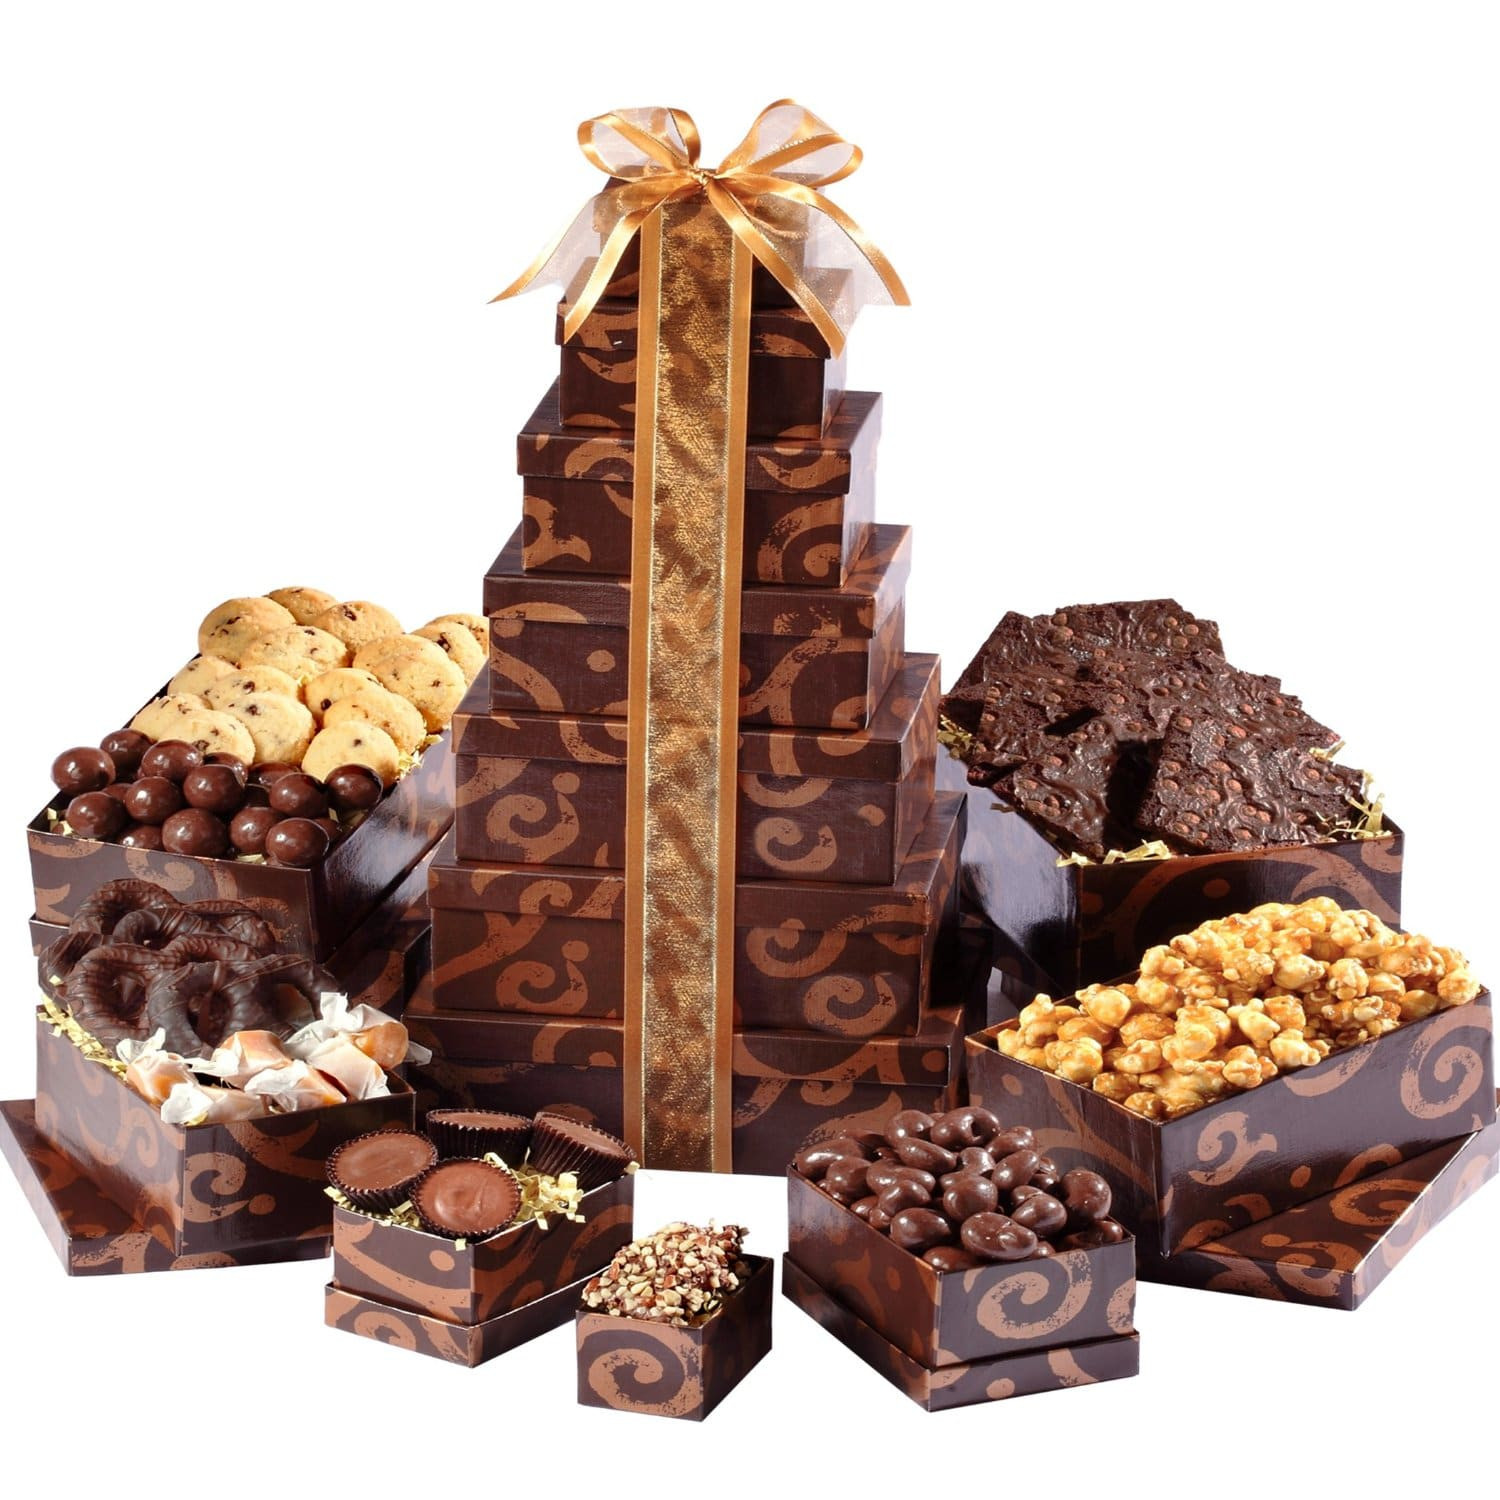 Top 10 Chocolate Gift Basket Ideas
 10 Most Unique Mother s Day Gift Ideas For 2014